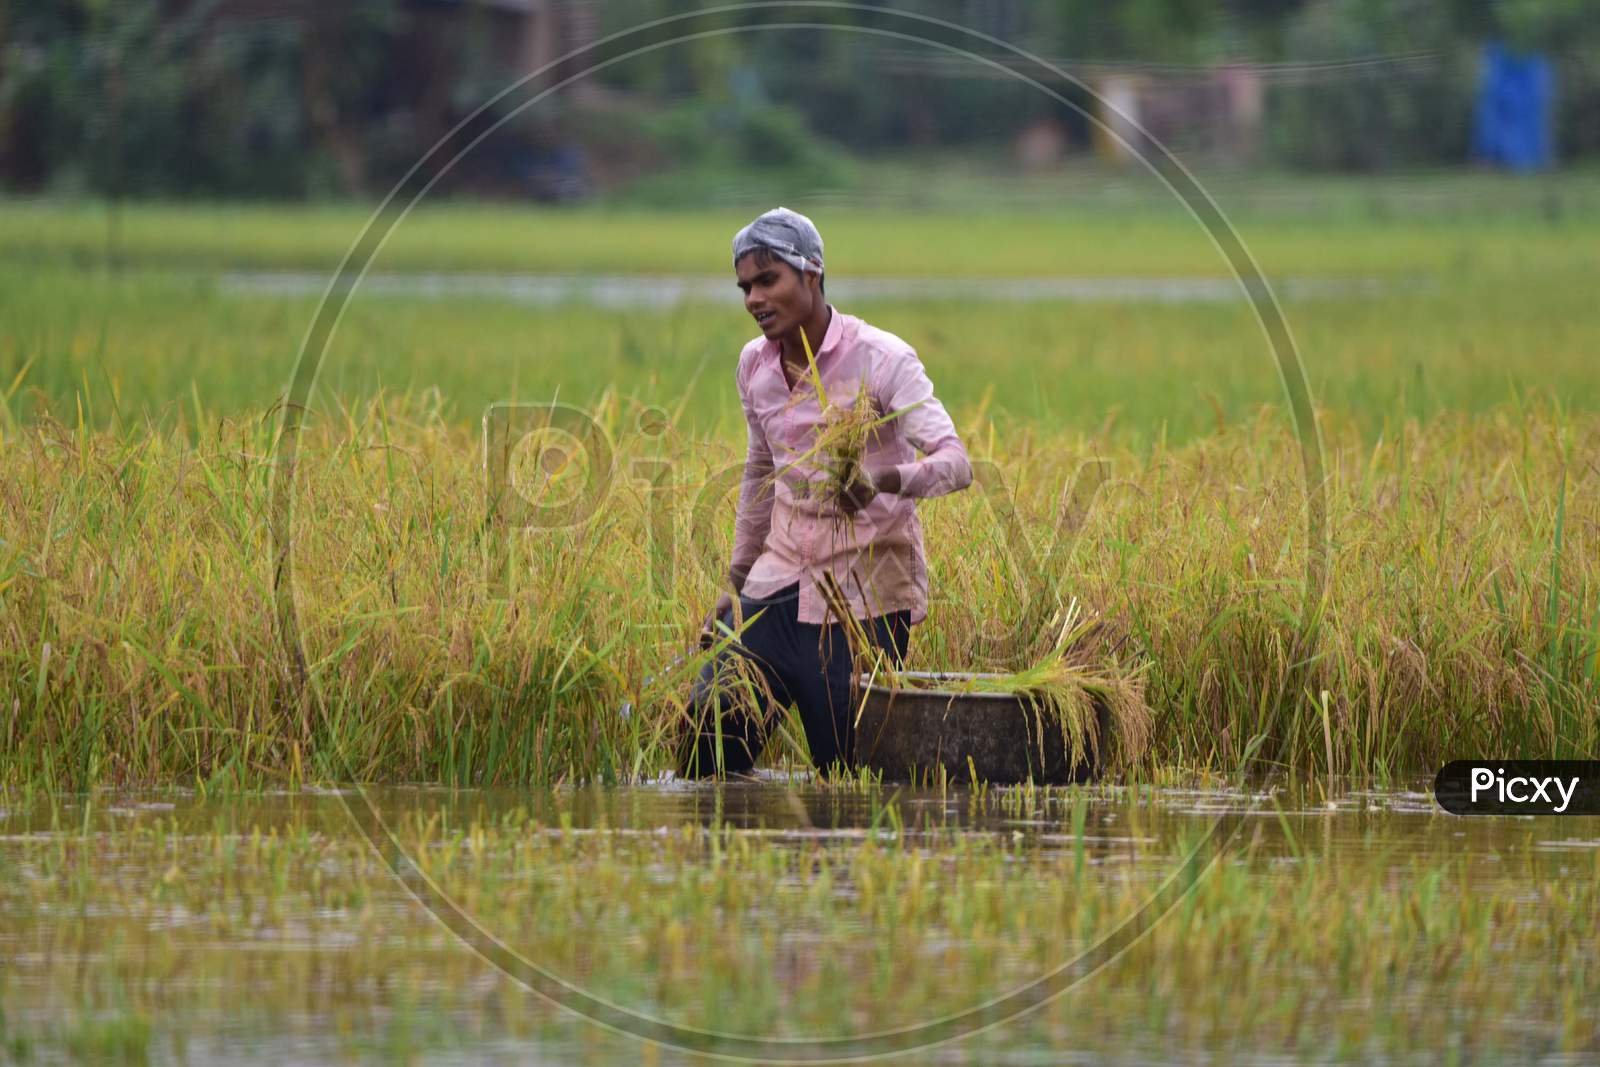 Villagers Cutting Harvest Crop In A Flooded Paddy Field At Kampur In Nagaon District Of Assam On May 27,2020